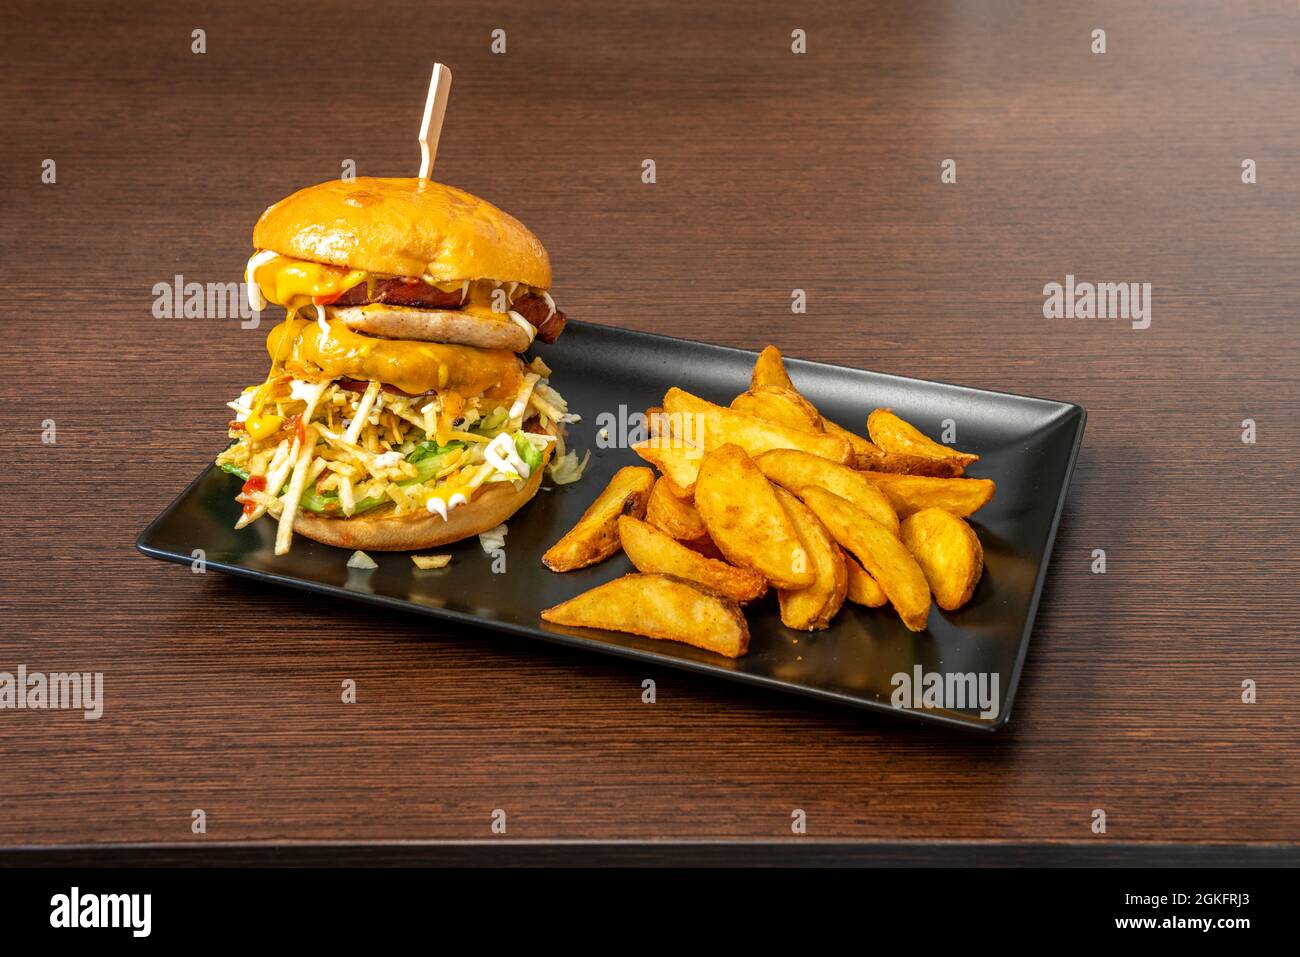 Double burger with lots of melted cheddar cheese, straw potatoes, bacon, lettuce, mayonnaise, mustard and ketchup with a side of deluxe fries Stock Photo